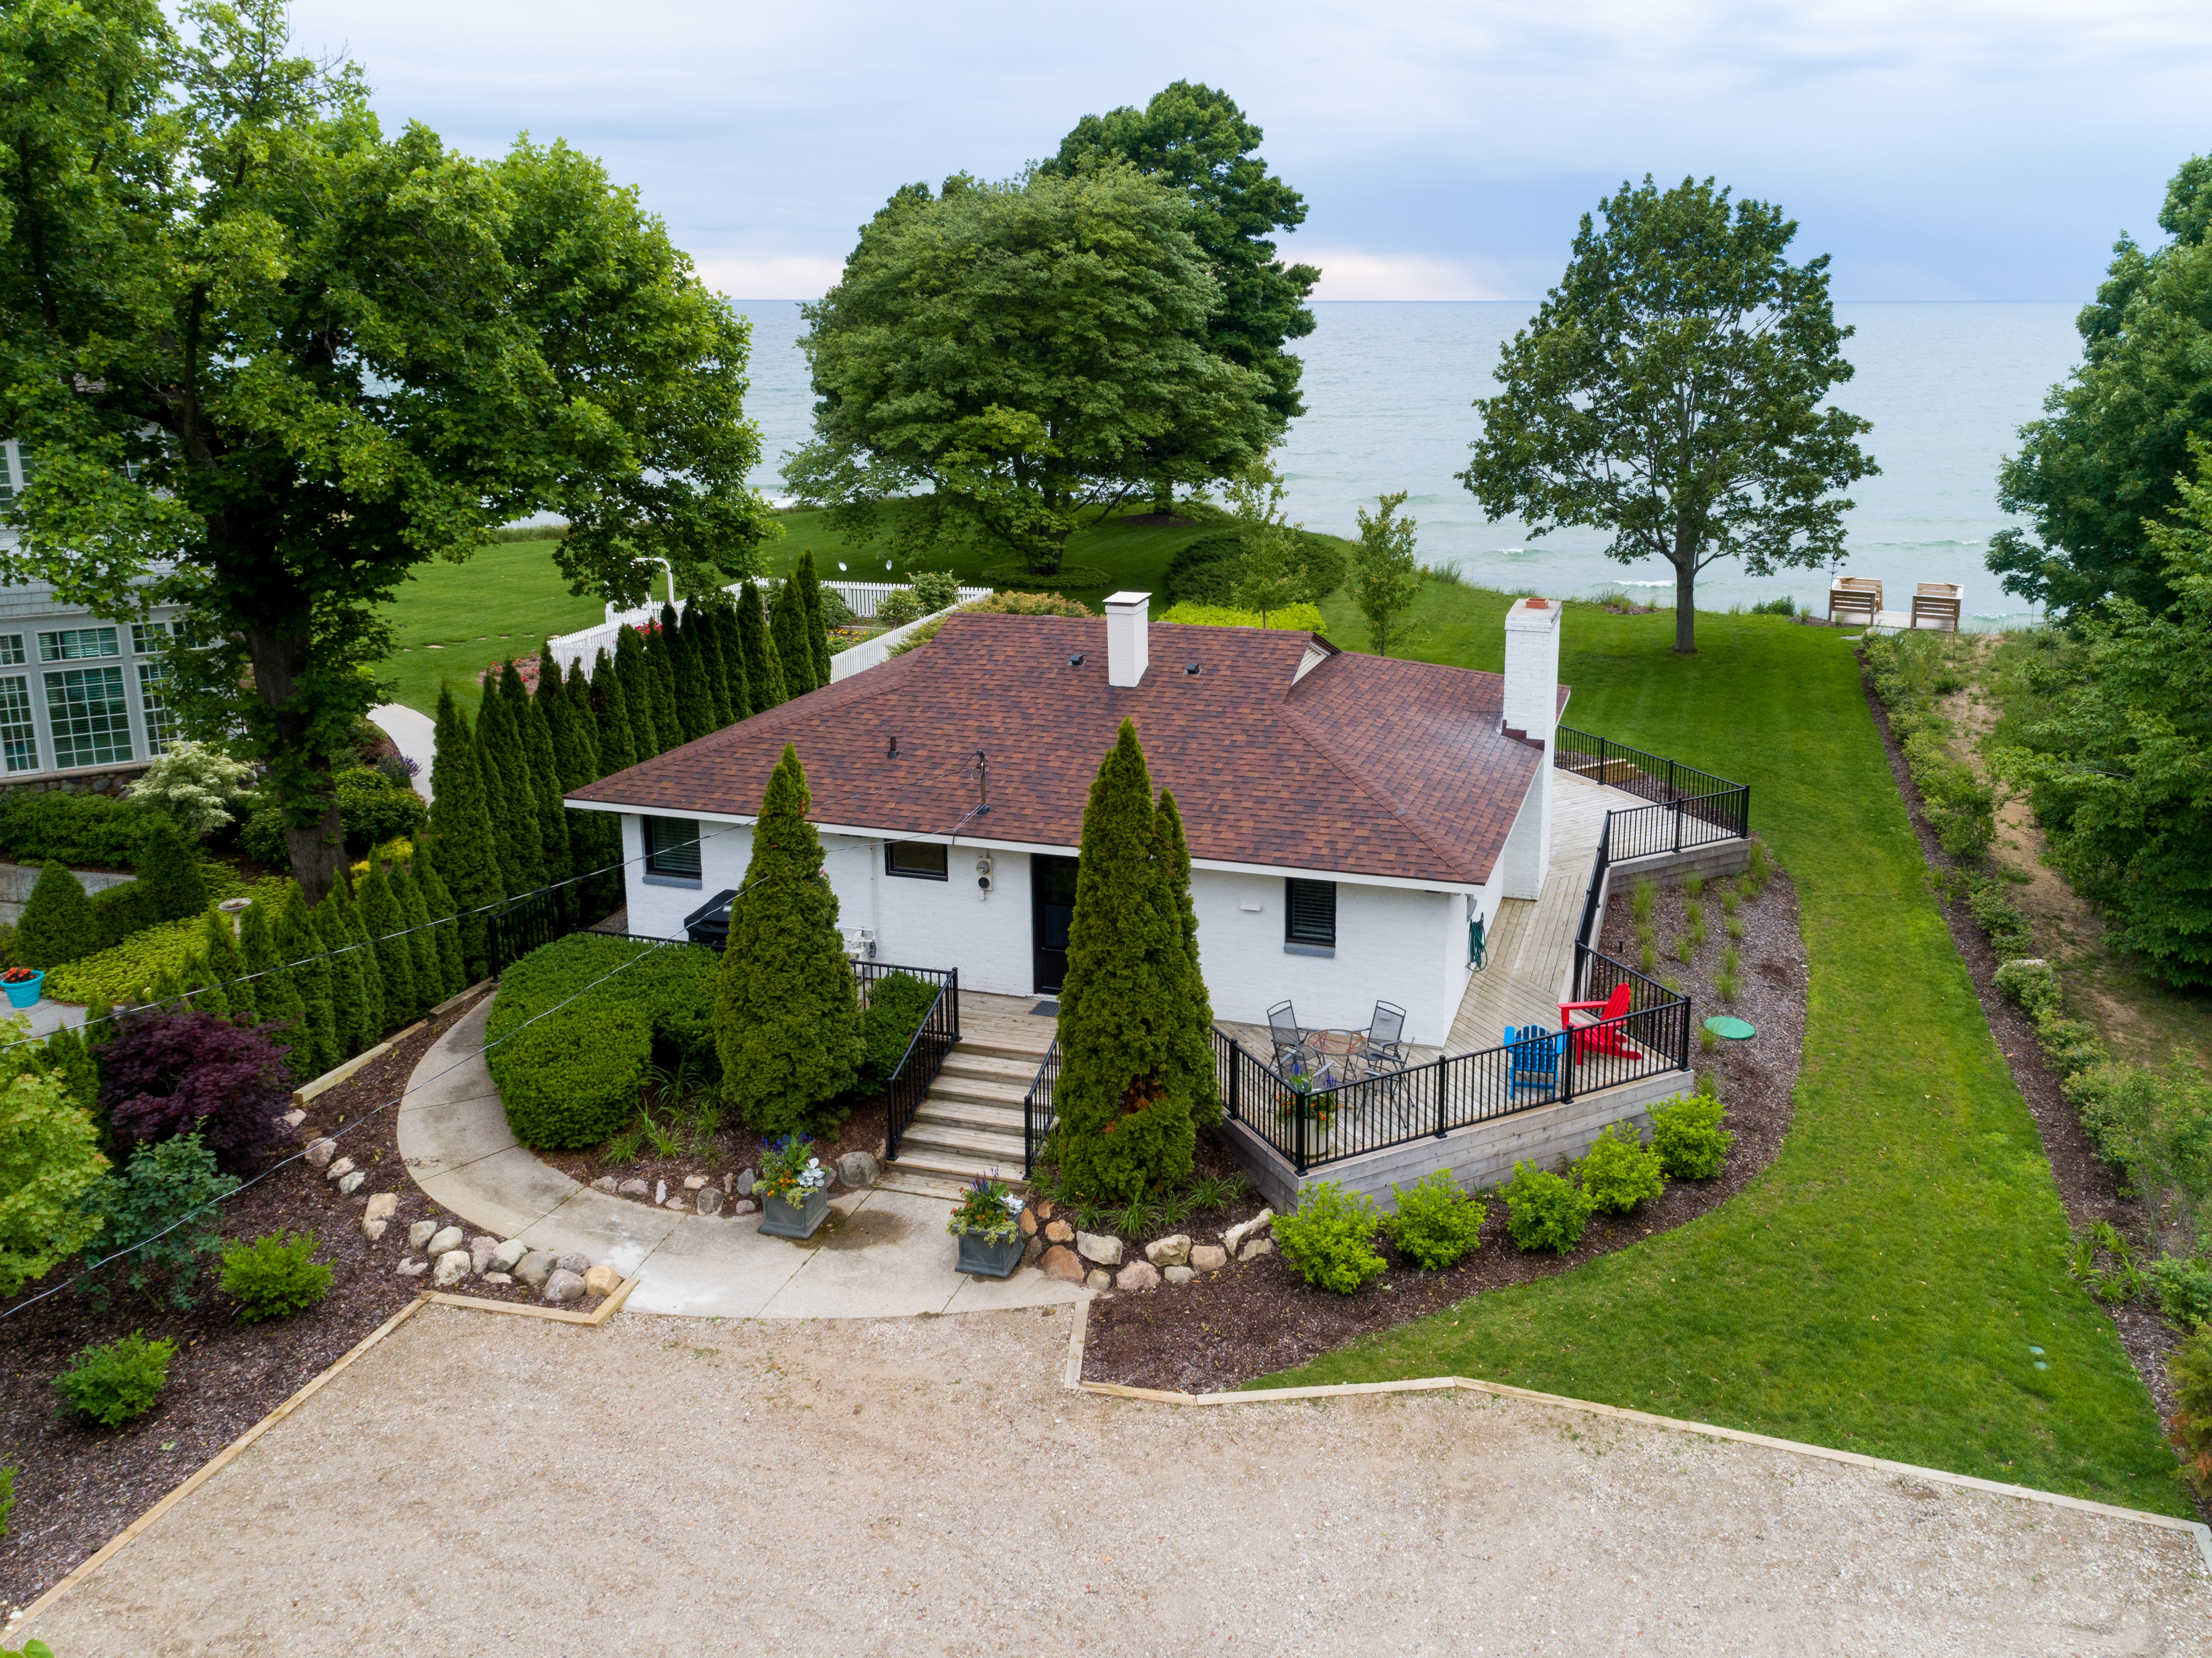 This four-bedroom cottage sits directly on Lake Michigan.